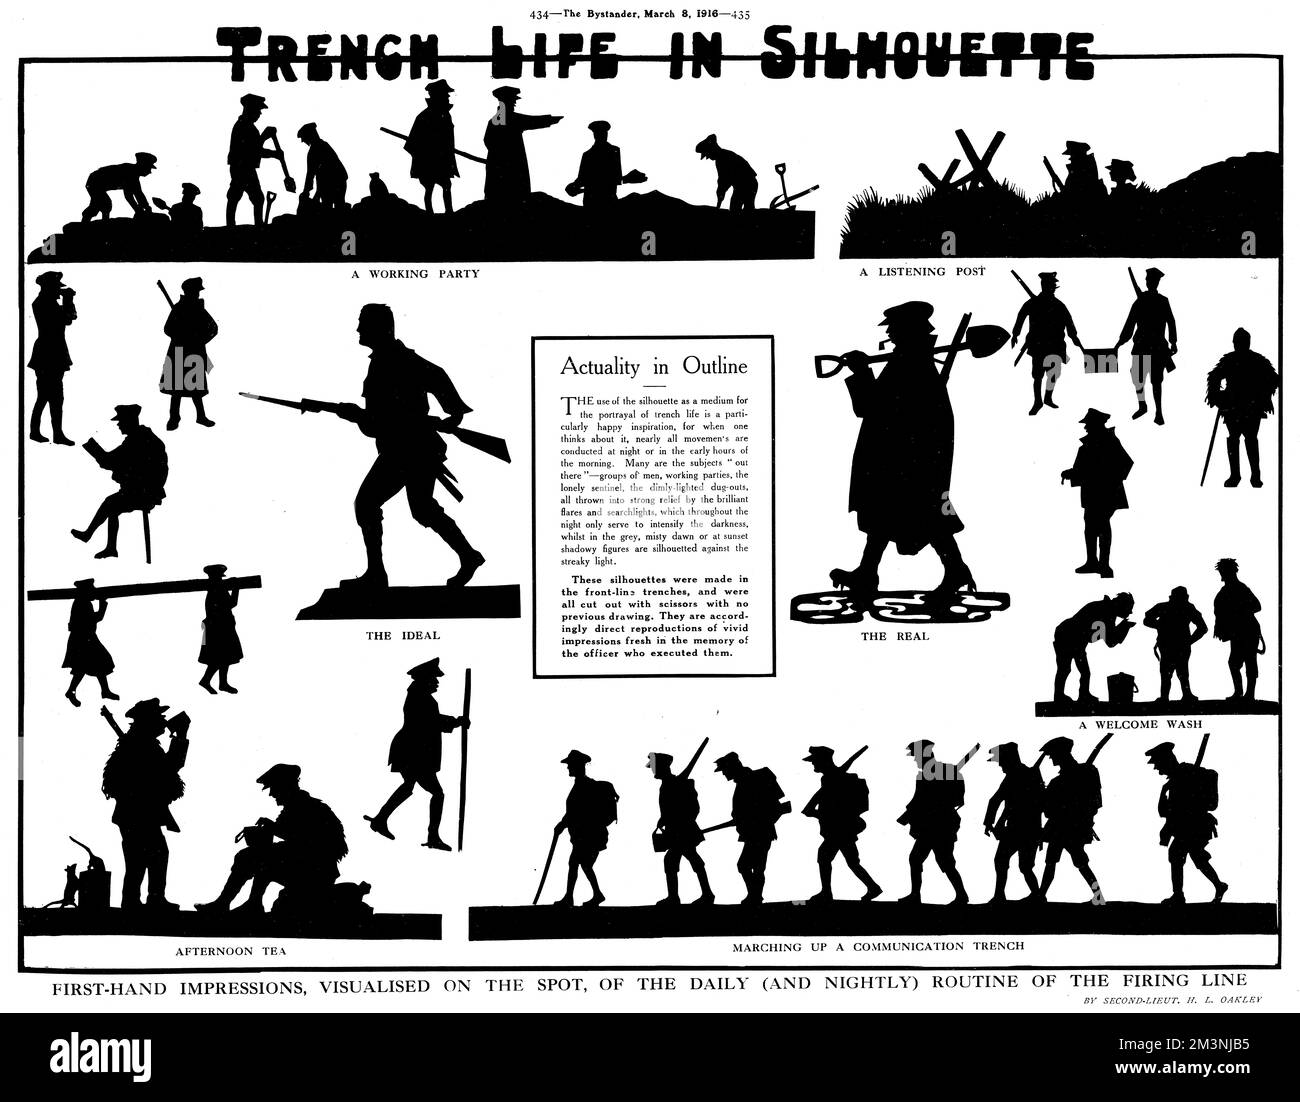 First hand impressions, visualised on the spot of the daily and nightly routine of the firing line on the Western Front during World War I.  Silhouettes cut by Second Lieutenant H. L. Oakley, the 'man with the magic scissors' who had a long career as a silhouette artists and cut the portraits of many famous people and royalty.  This appears to be Oakley's first silhouette published in The Bystander.  He would make many more contributions during the war, and in other ILN publications such as Holly Leaves in the 1940s and 50s.     Date: 1916 Stock Photo